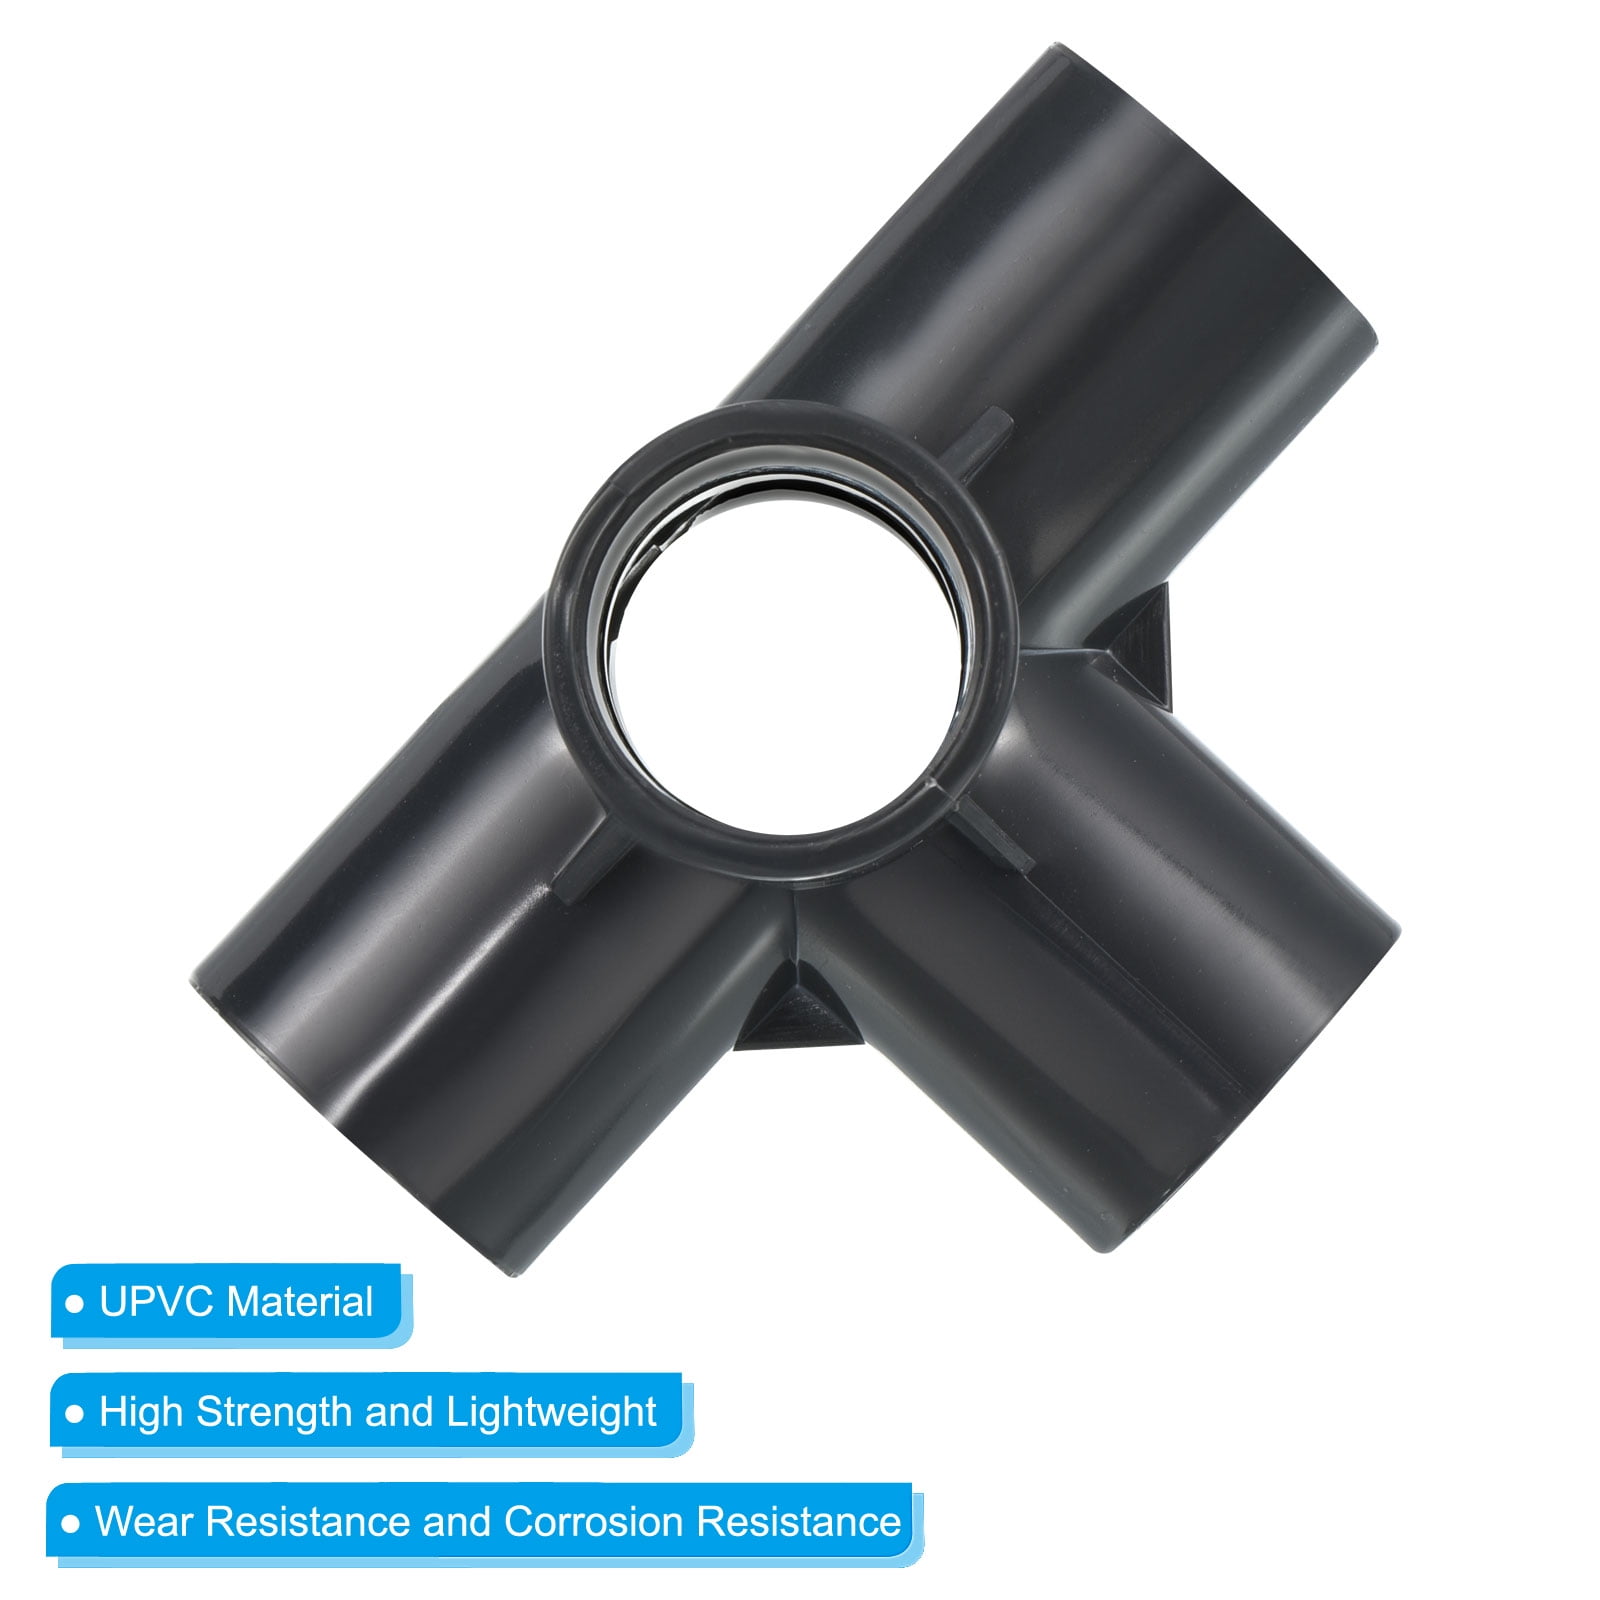 Pipe Fittings Accessories, for Structure Pipe at Rs 99/onwards in